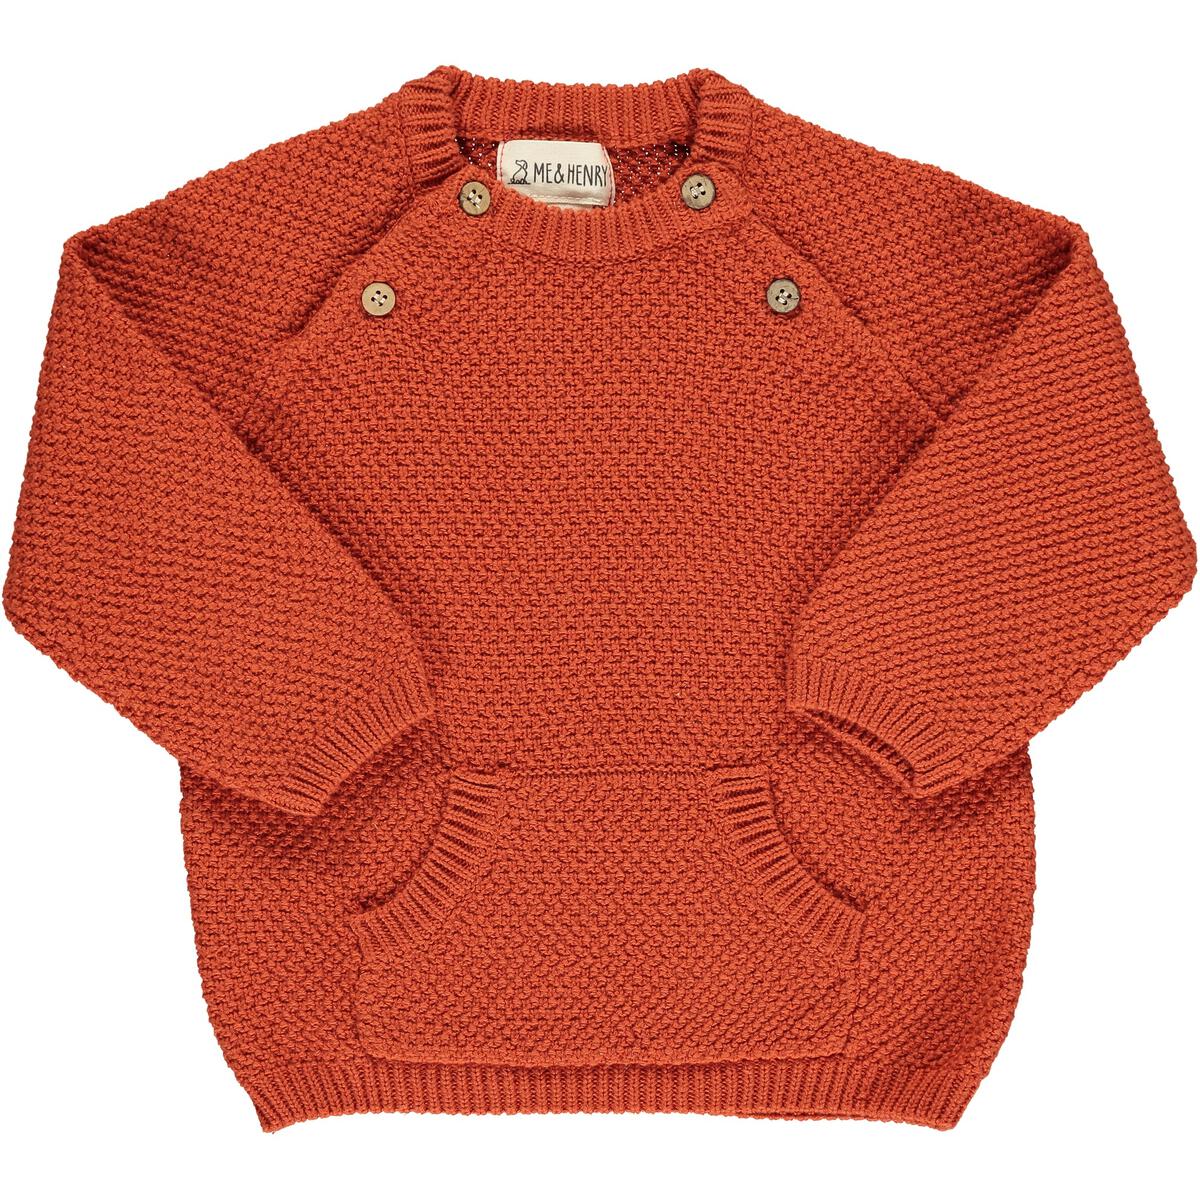 The Morrison Sweater will keep your little one warm and dapper! Made of incredibly soft 100% cotton, it looks smart with its buttons on the shoulders, and is perfect for all the budding gentlemen out there! Lookin' suave has never been so cosy!